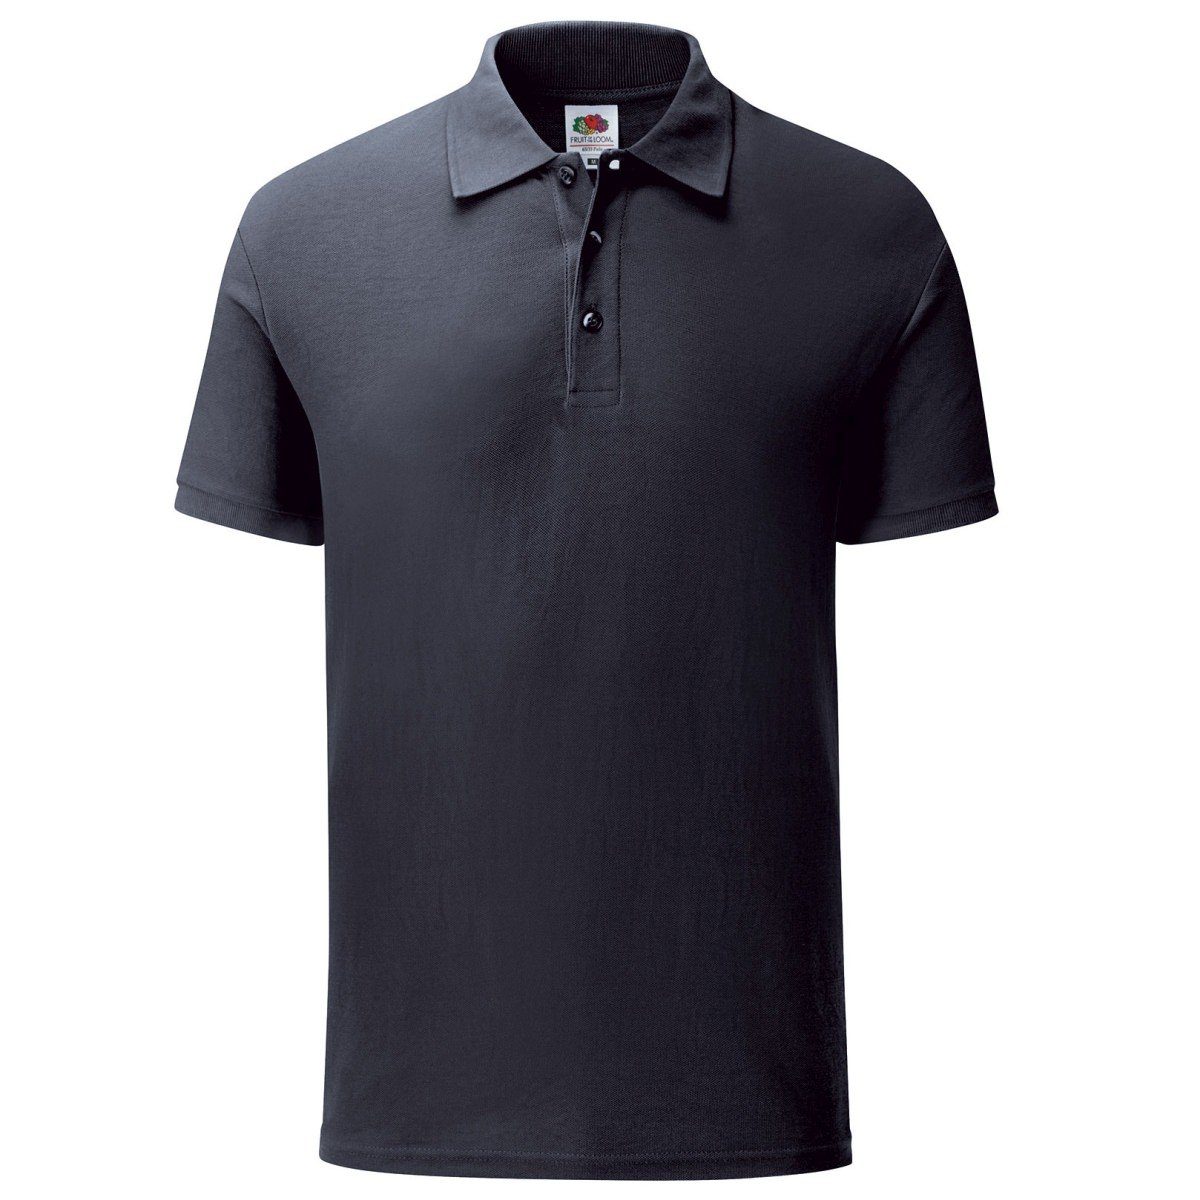 Fruit of the Loom Poloshirt Fruit of the Loom 65/35 Tailored Fit deep navy